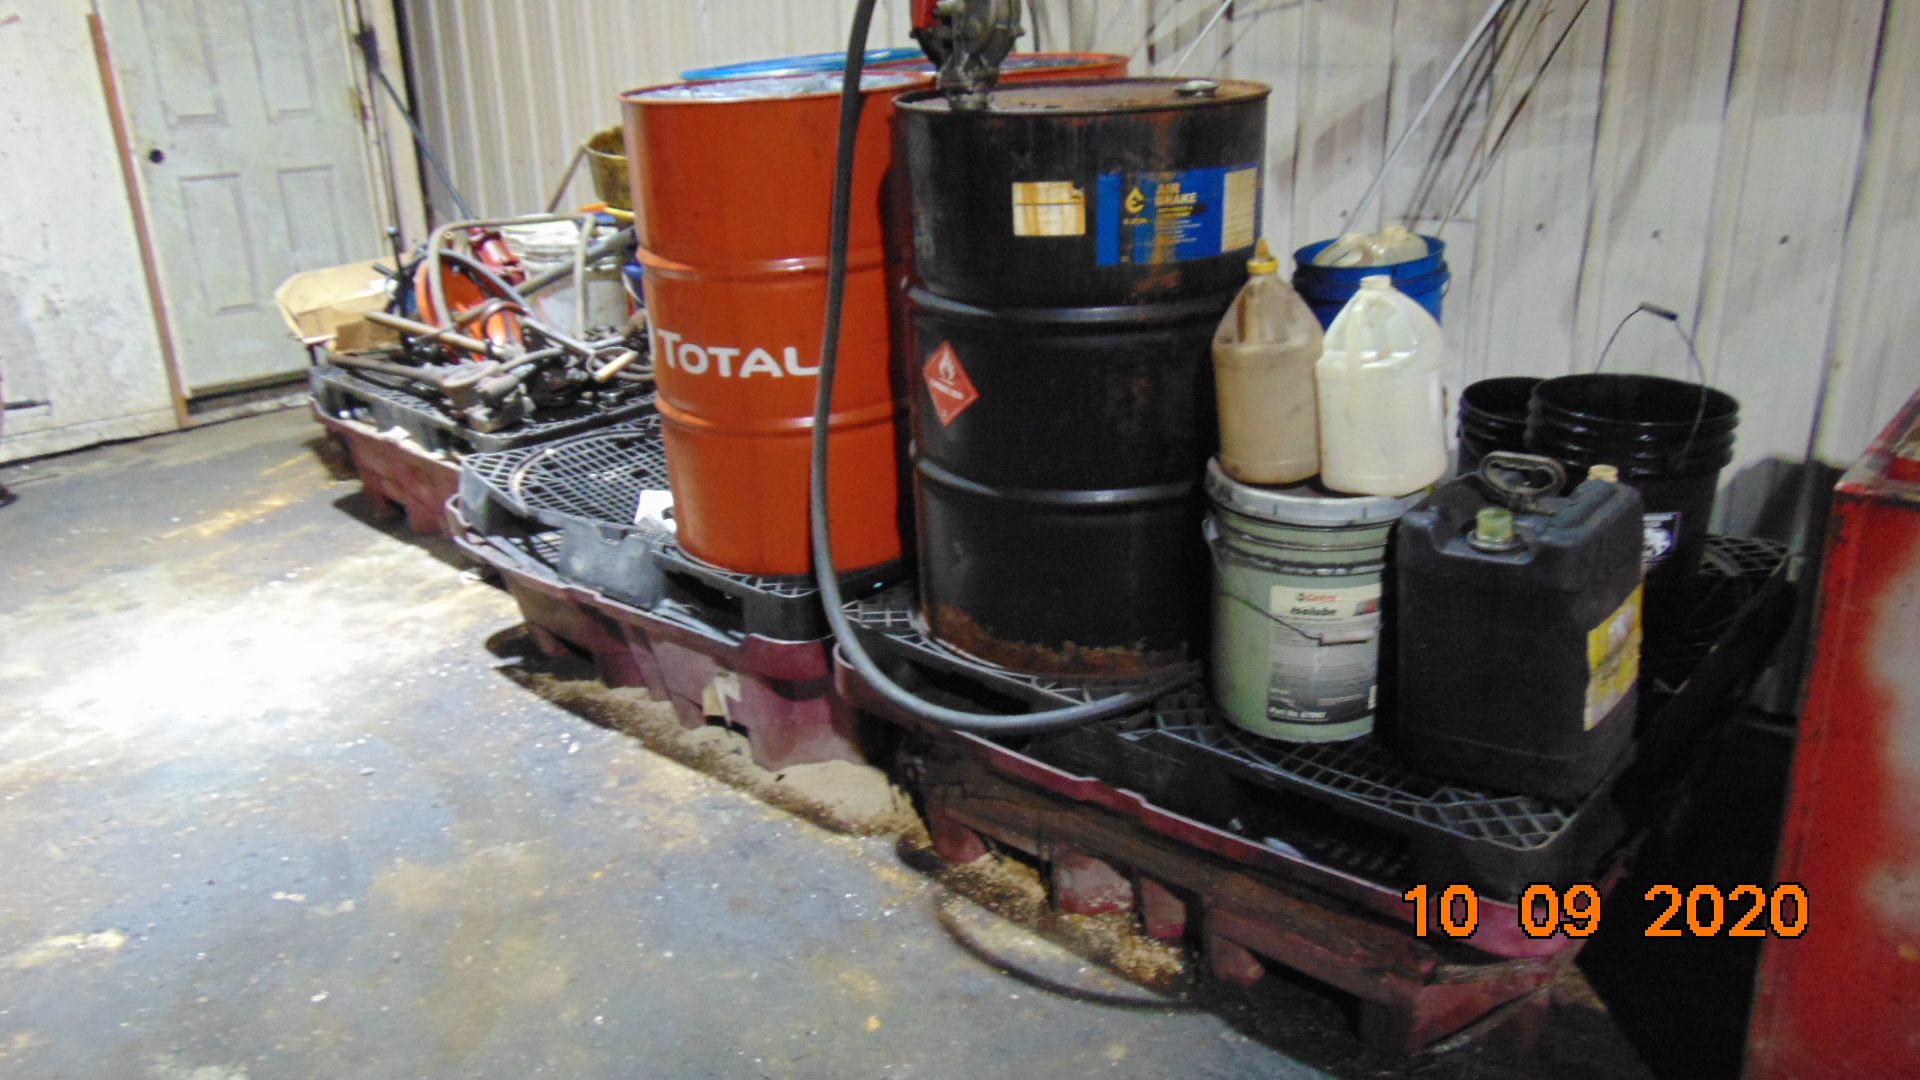 Contents in Trailer Repair Building and Attached Rear Building - Image 2 of 16